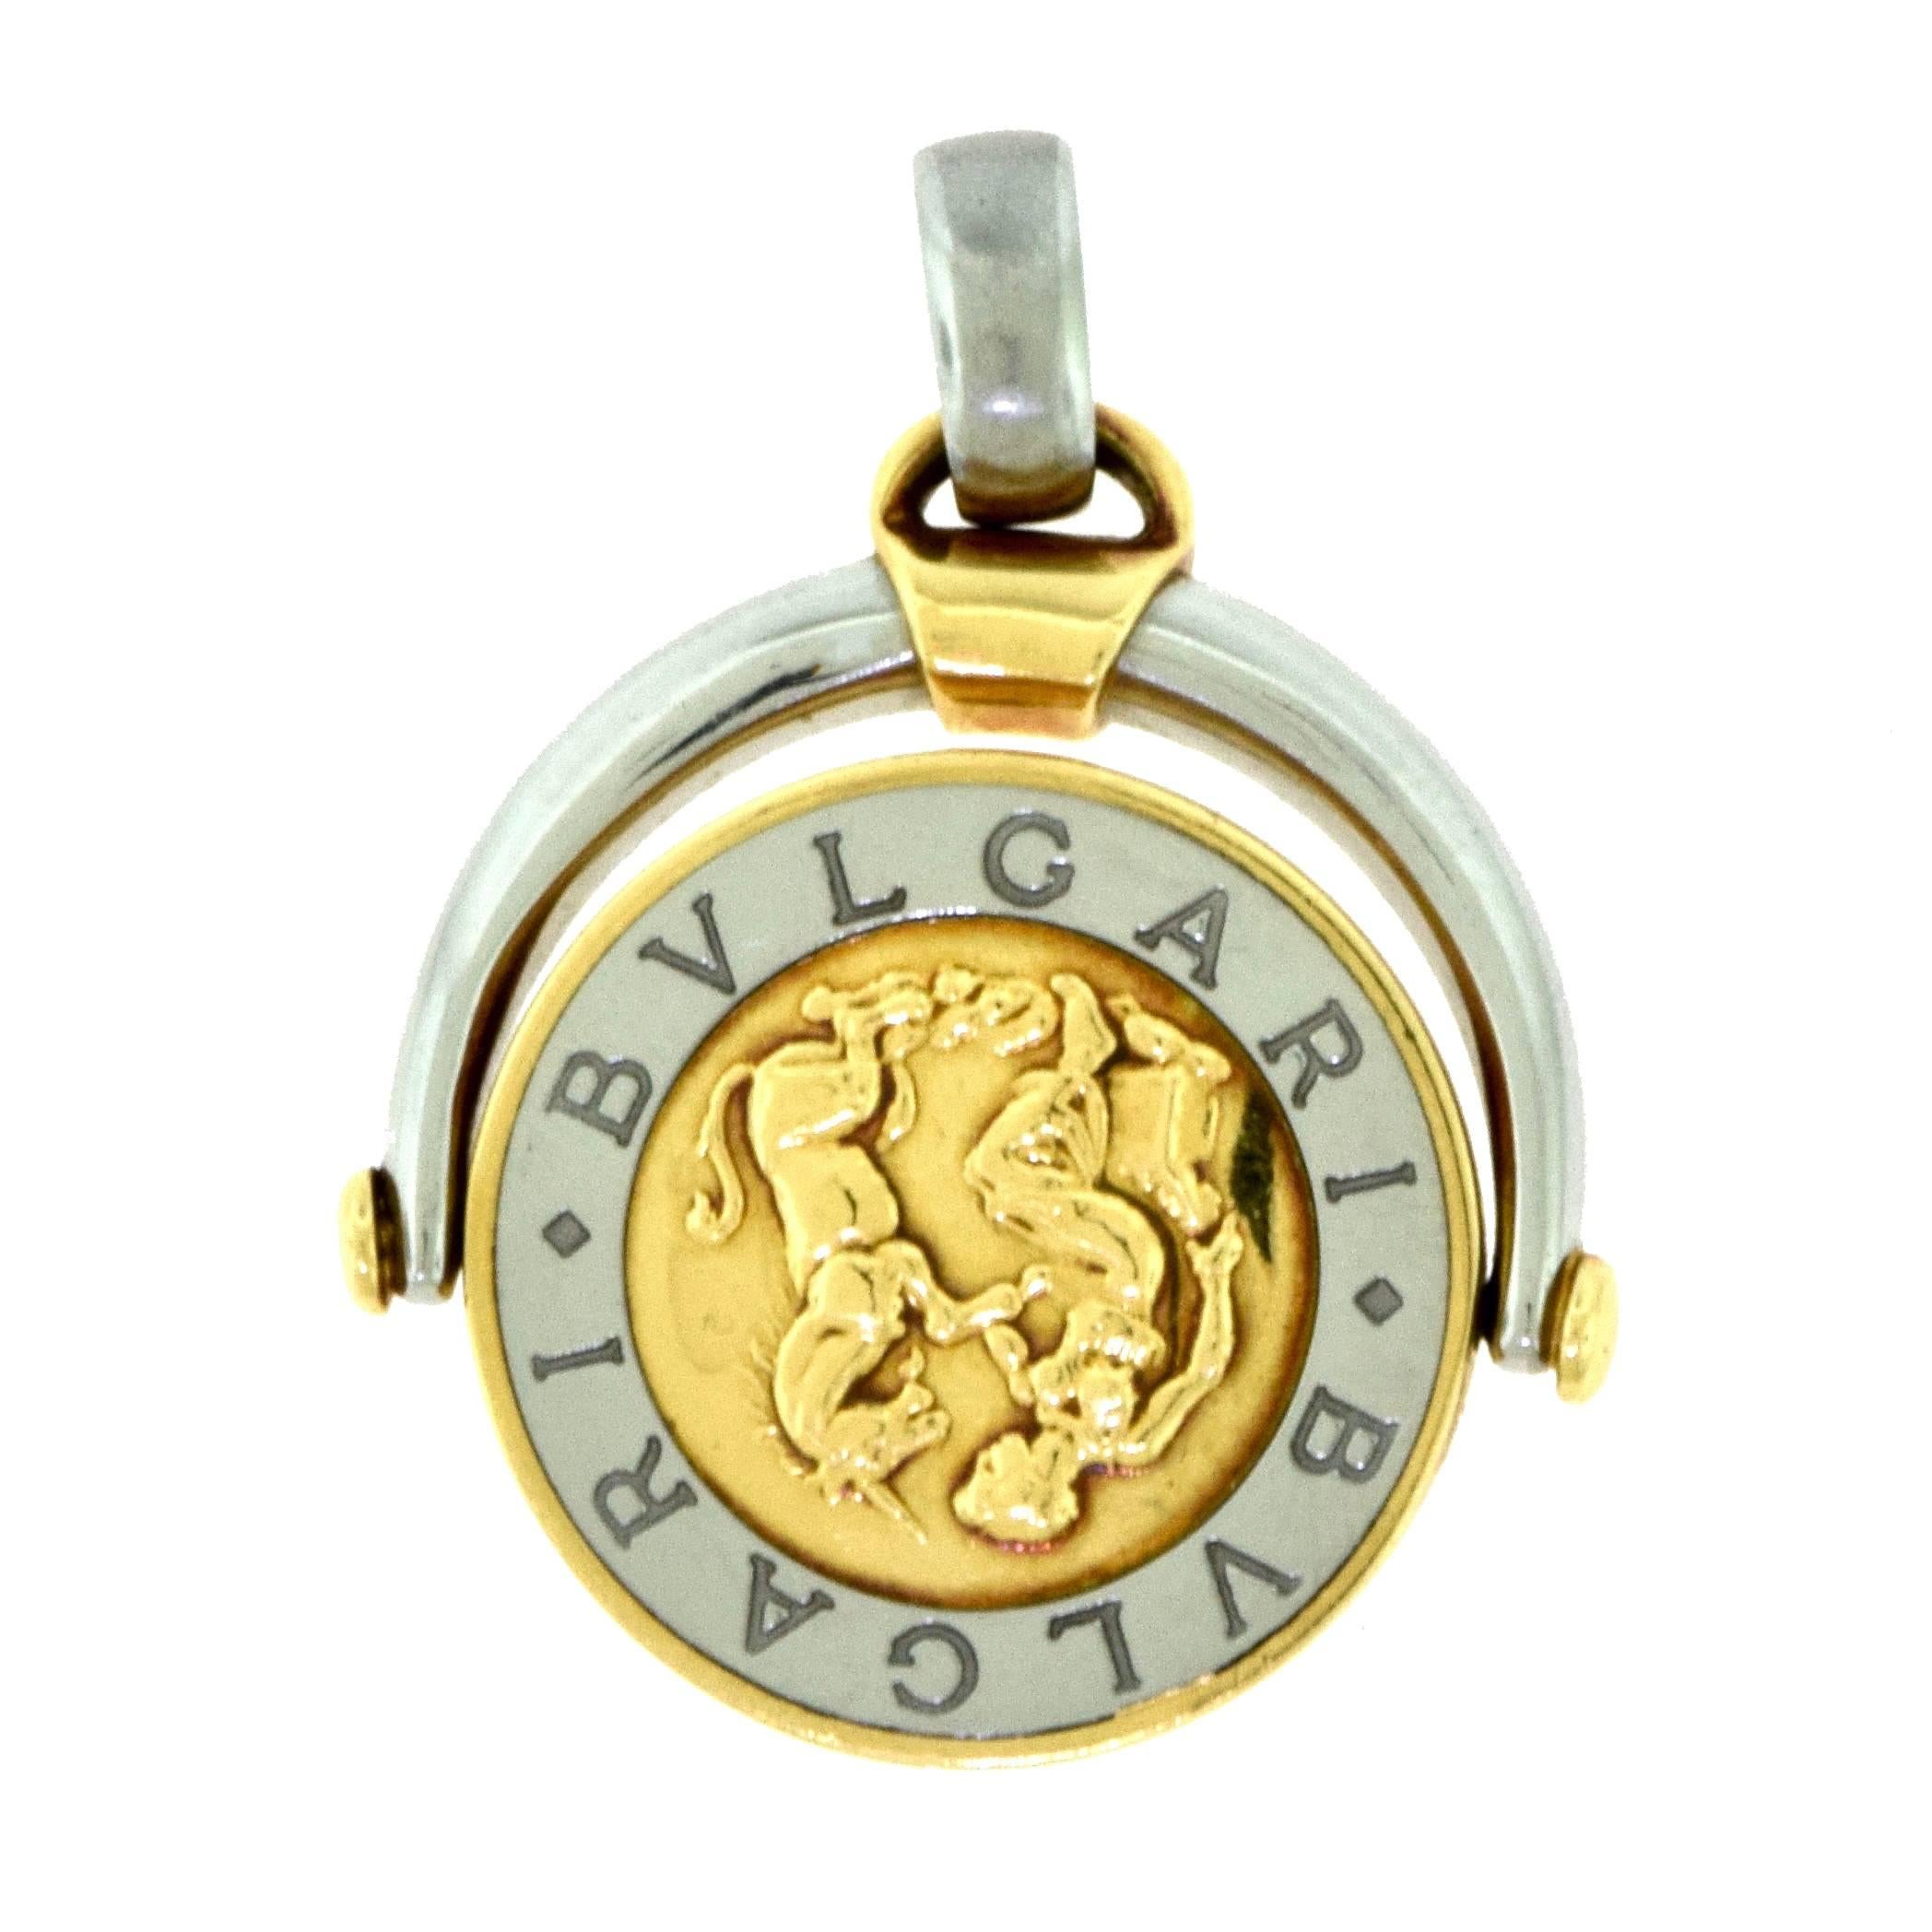 Designer: BVLGARI
Metal: Stainless Steel, 18k Yellow Gold
Total Item Weight (g): 13.6
Diameter: 22.09 mm
Thickness: 2.72 mm
Hallmark: 750 BVLGARI Gold and Steel Made in Italy

This magnificent BVLGARI pendant is crafted from solid 18k yellow gold